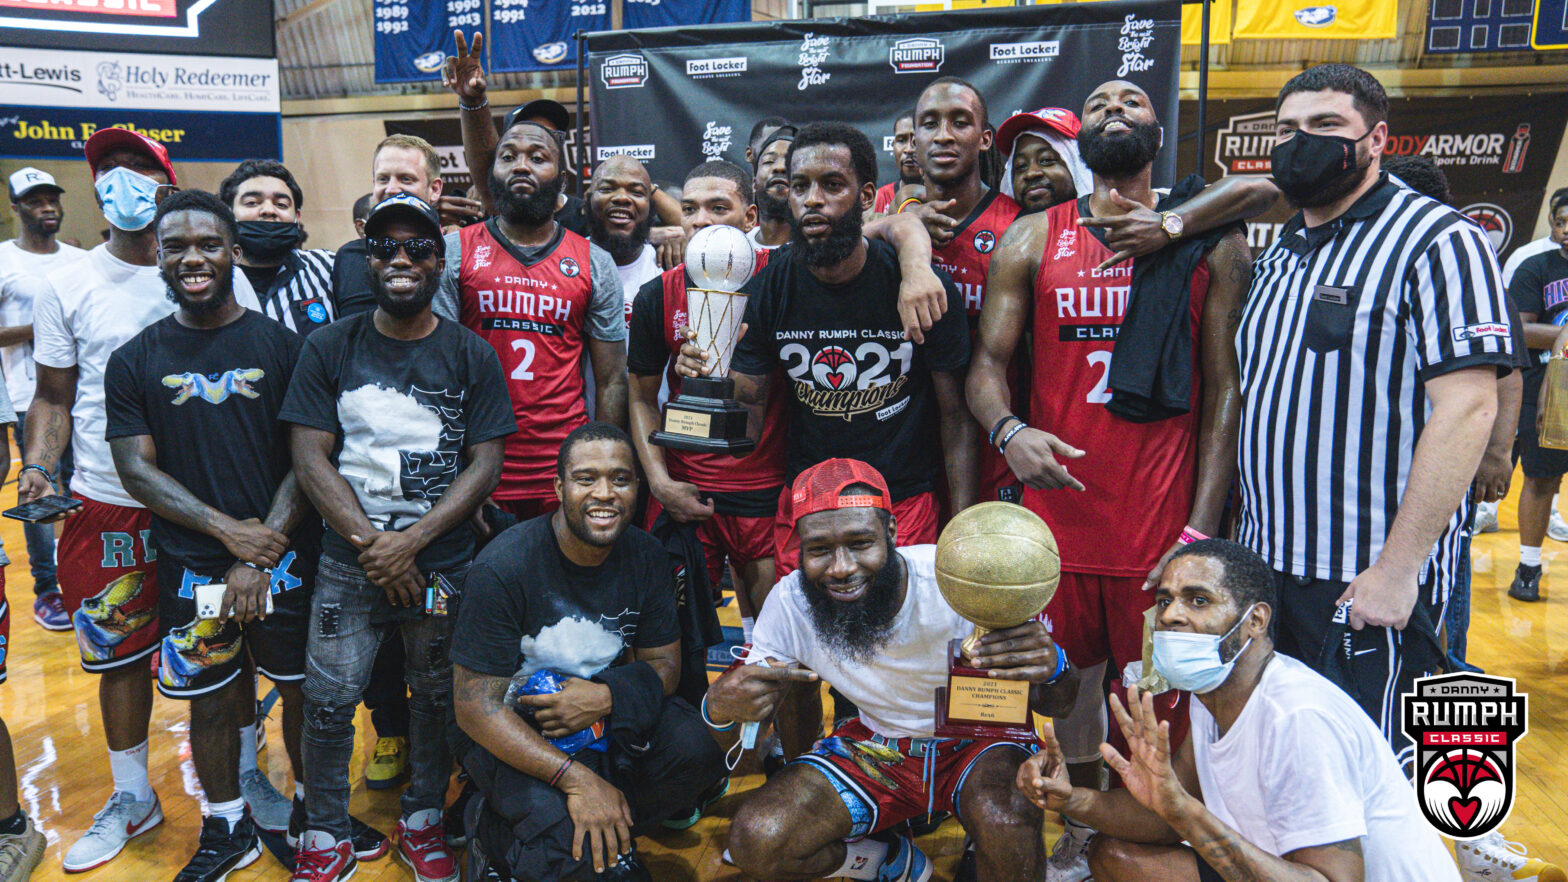 Team Rex 6 secures first Rumph Classic title in double OT thriller